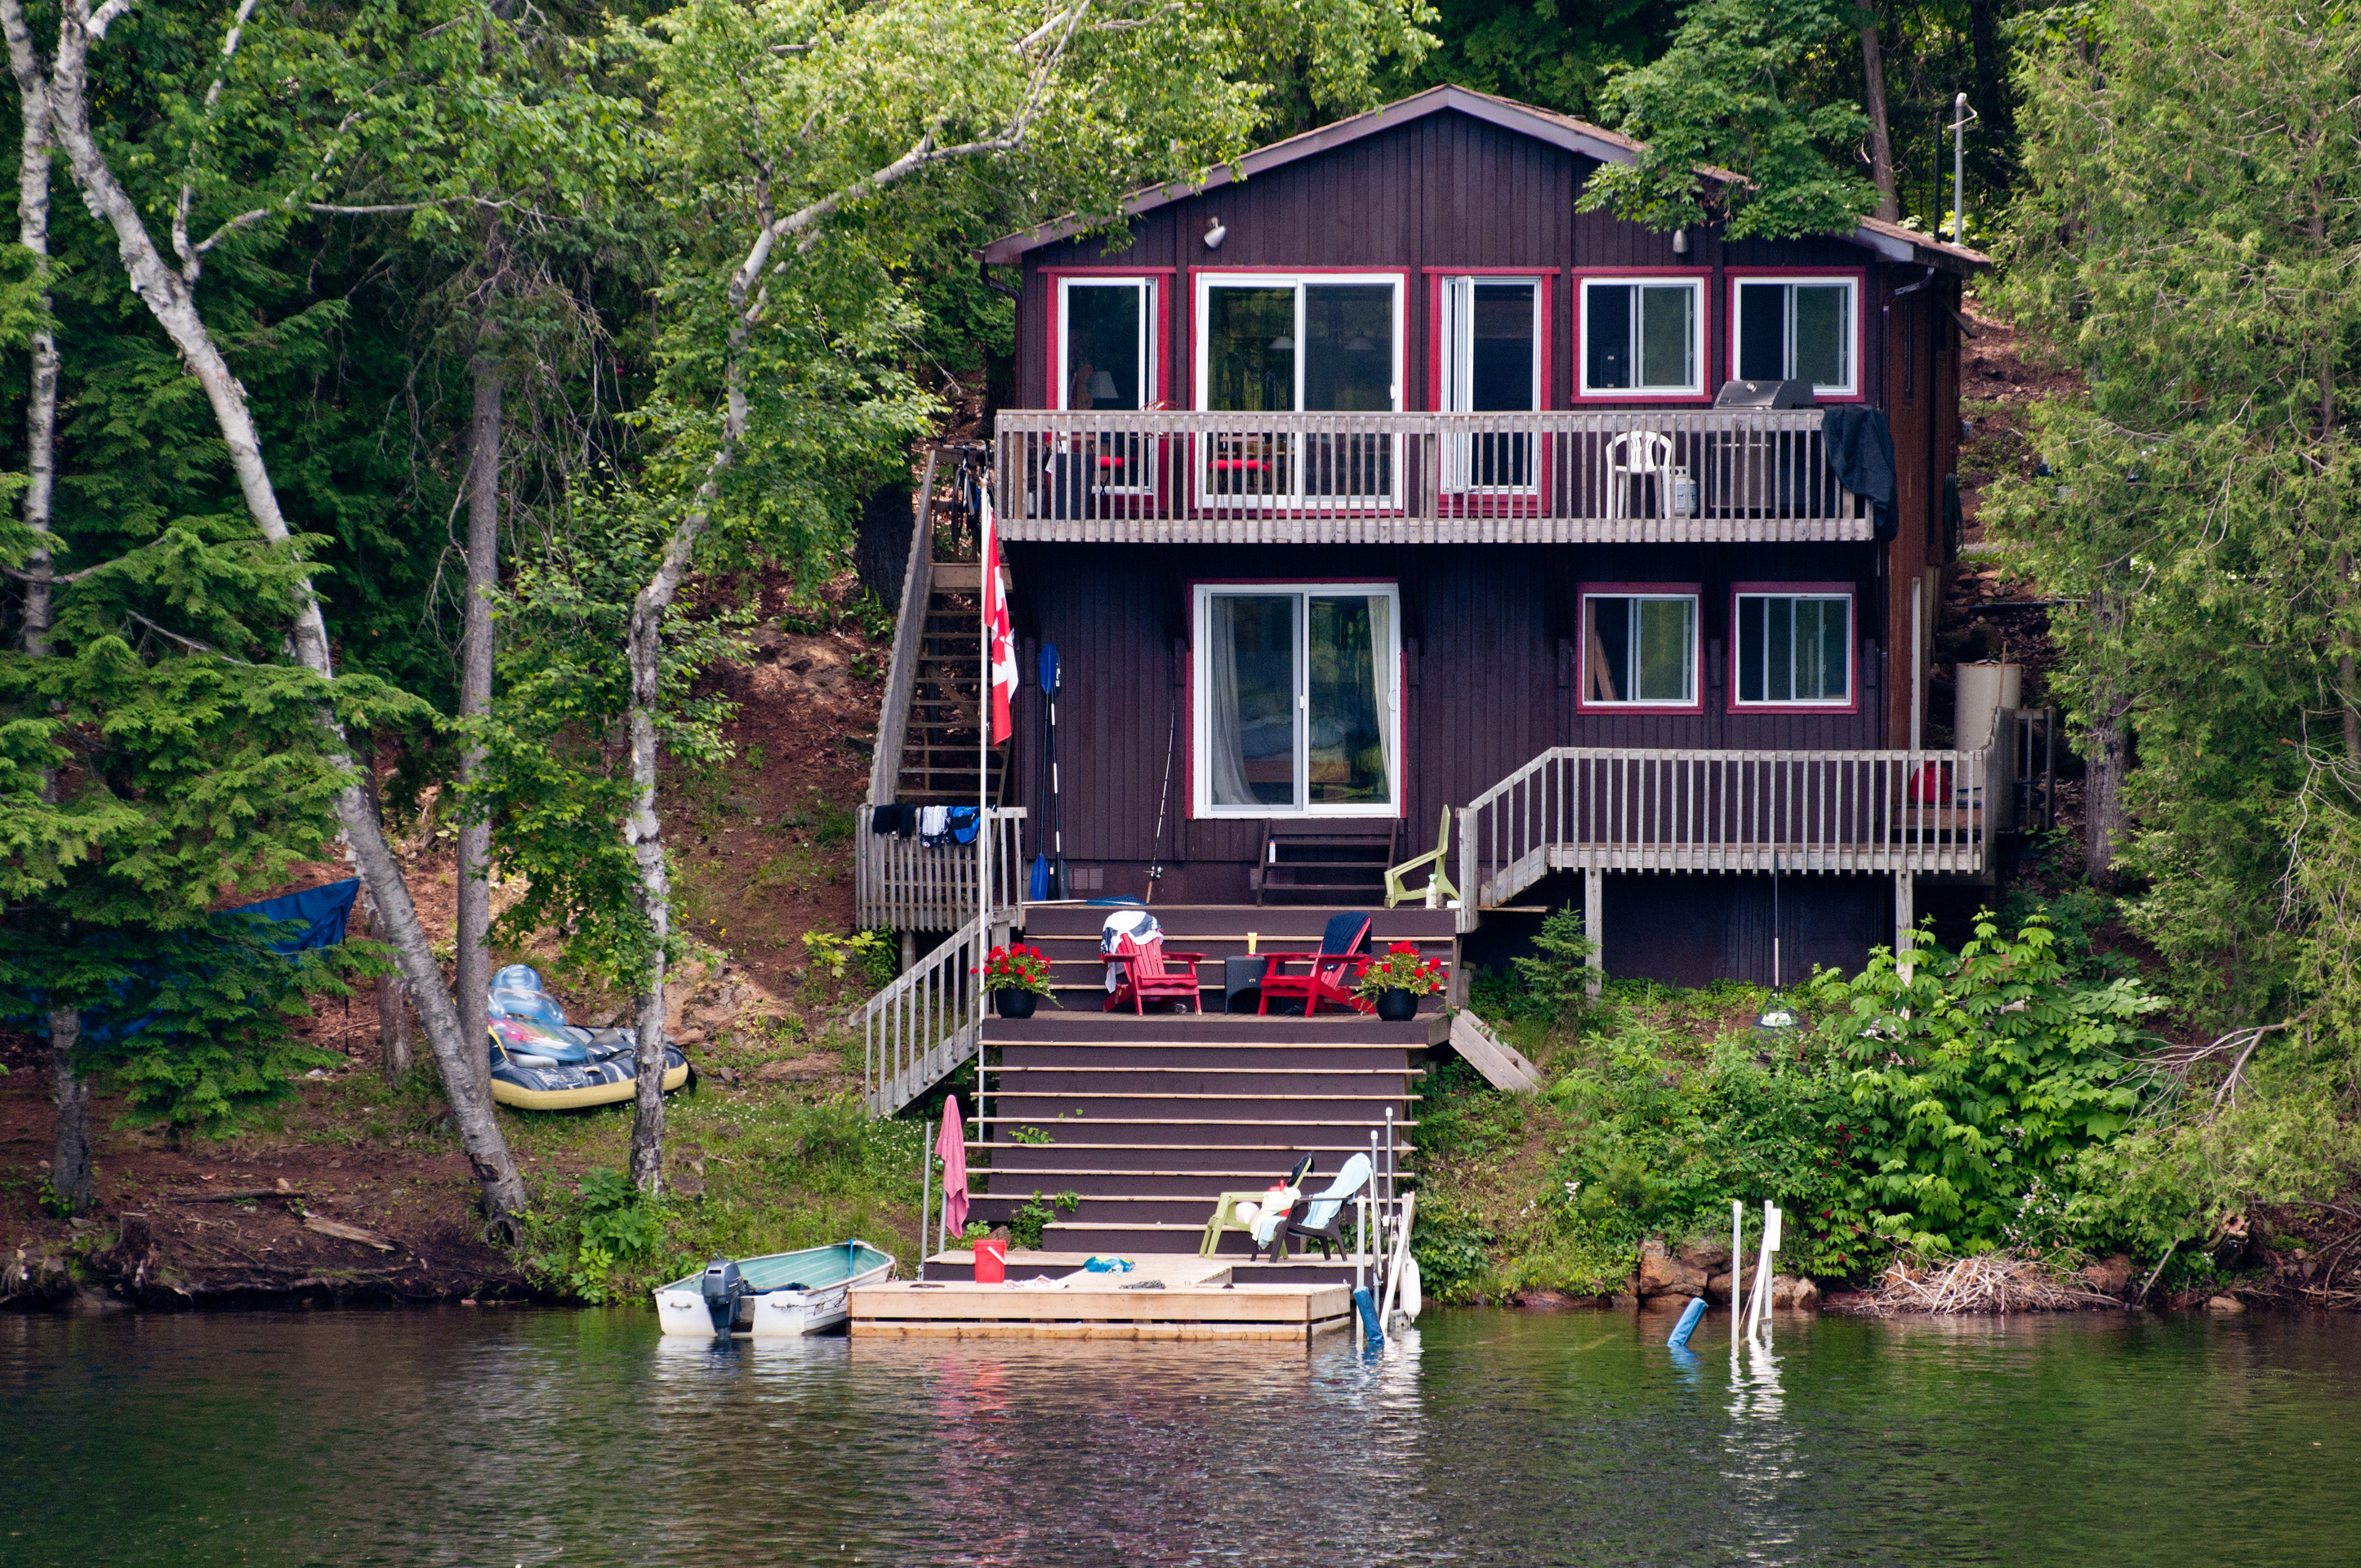 Capital gains changes spur cottage market ‘anxiety.’ Will owners rush to sell?